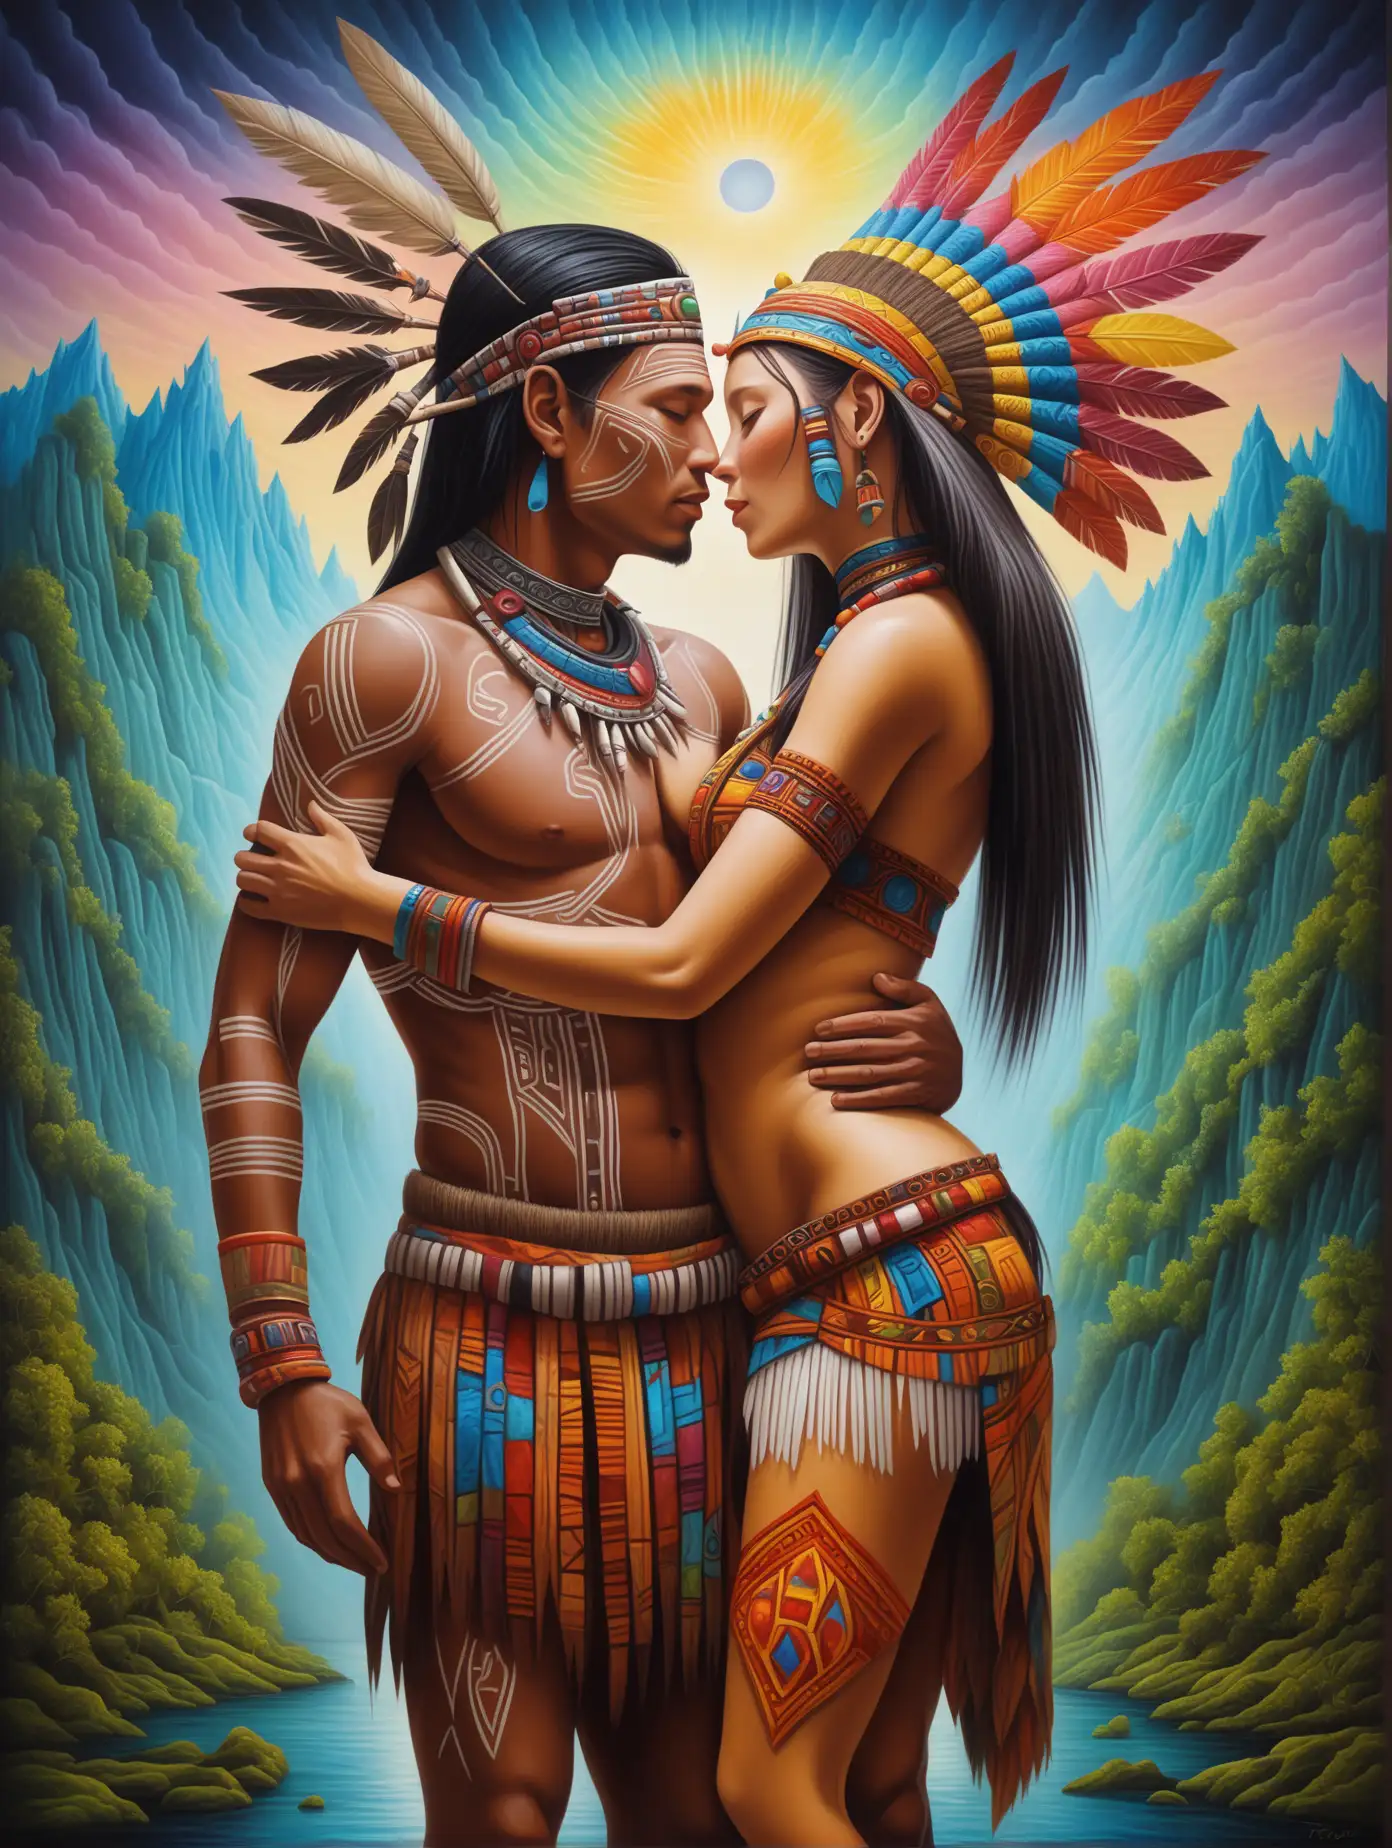 create a surreal oil painting of two heterosexual lovers in tribal outfit, capturing intense love in a dream-like setting with vivid details and lifelike realism.
